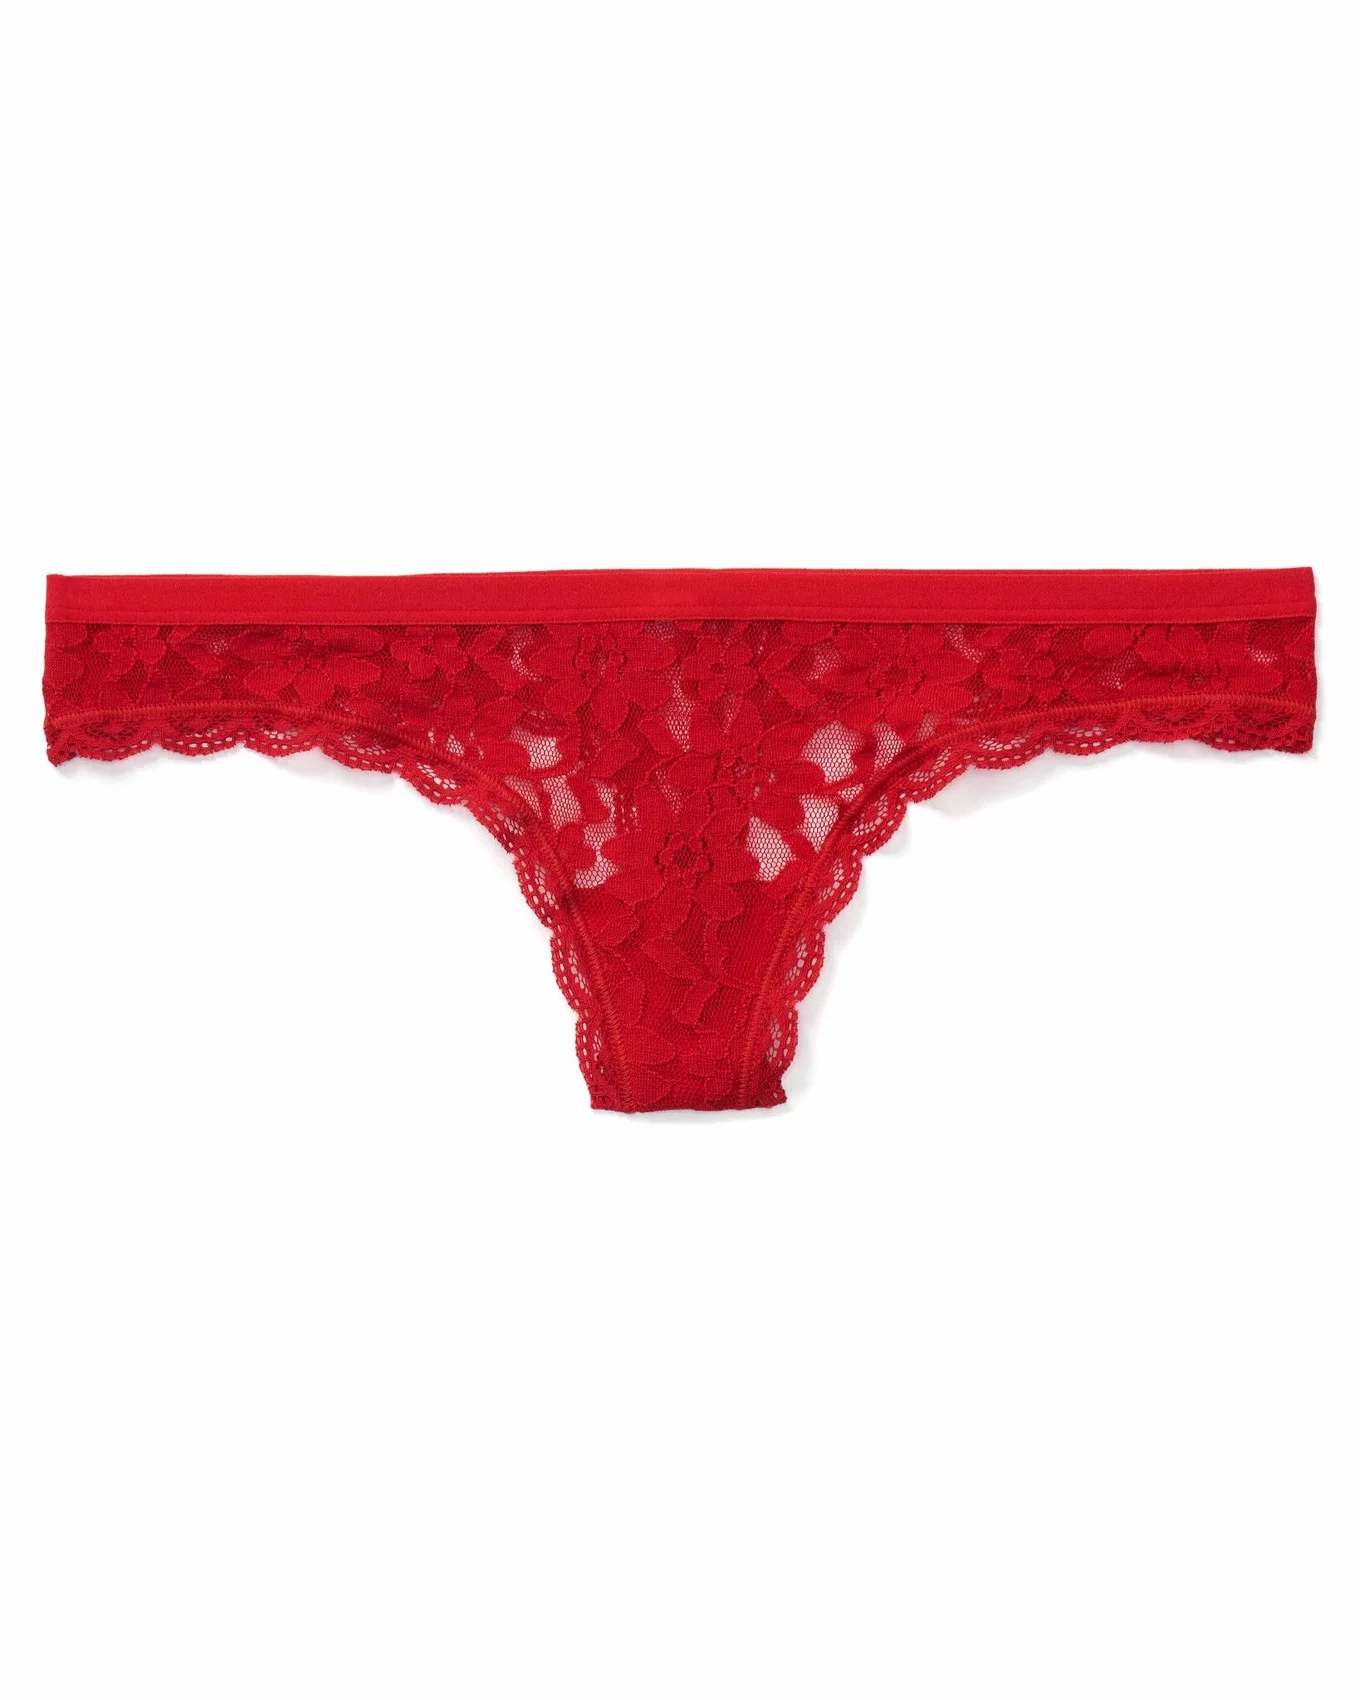 Only Want You Lace Crotchless Panty - Red, Fashion Nova, Lingerie &  Sleepwear